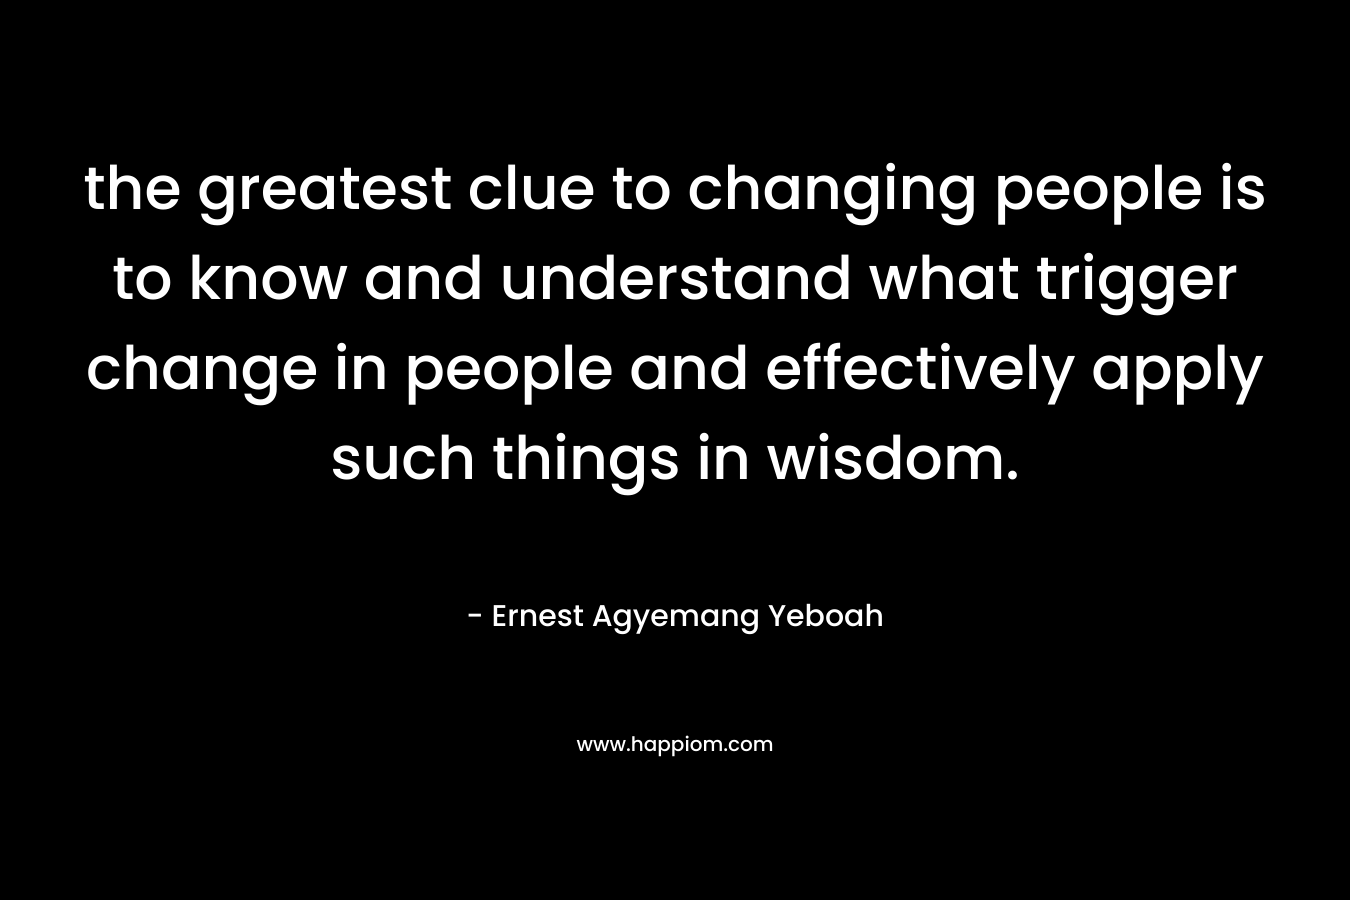 the greatest clue to changing people is to know and understand what trigger change in people and effectively apply such things in wisdom. – Ernest Agyemang Yeboah